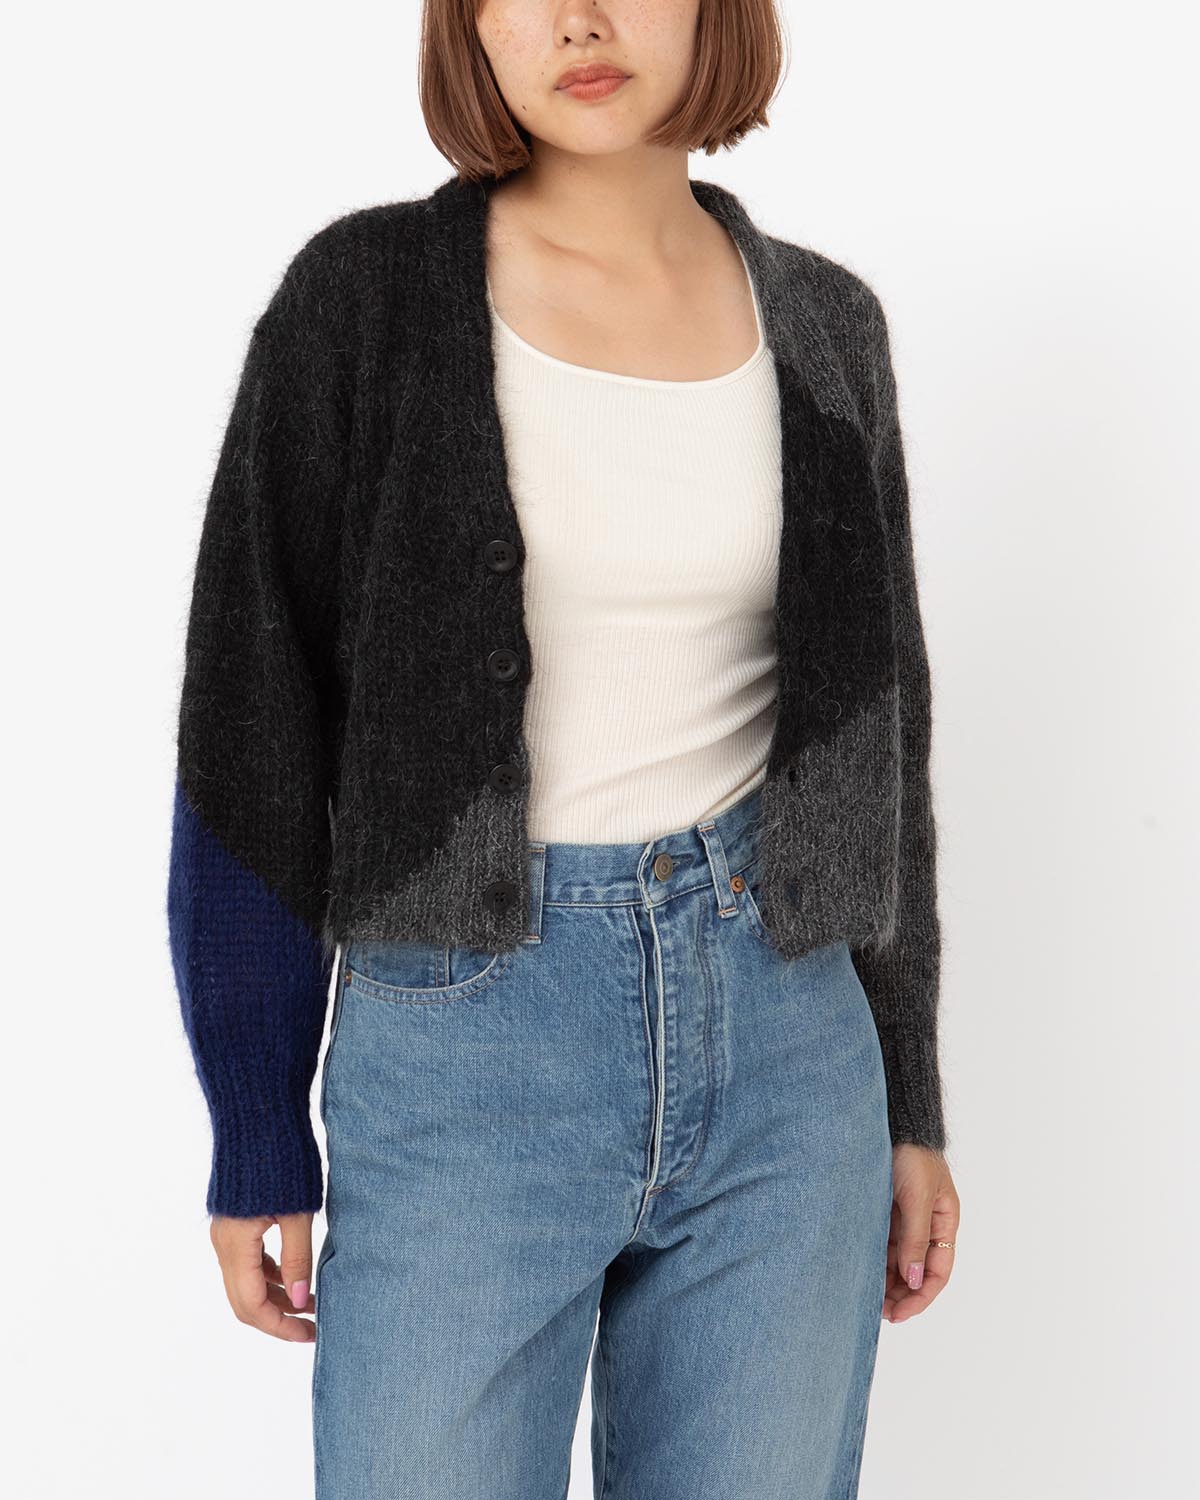 HAND KNITTED MOHAIR CARDIGAN (WOMEN'S)